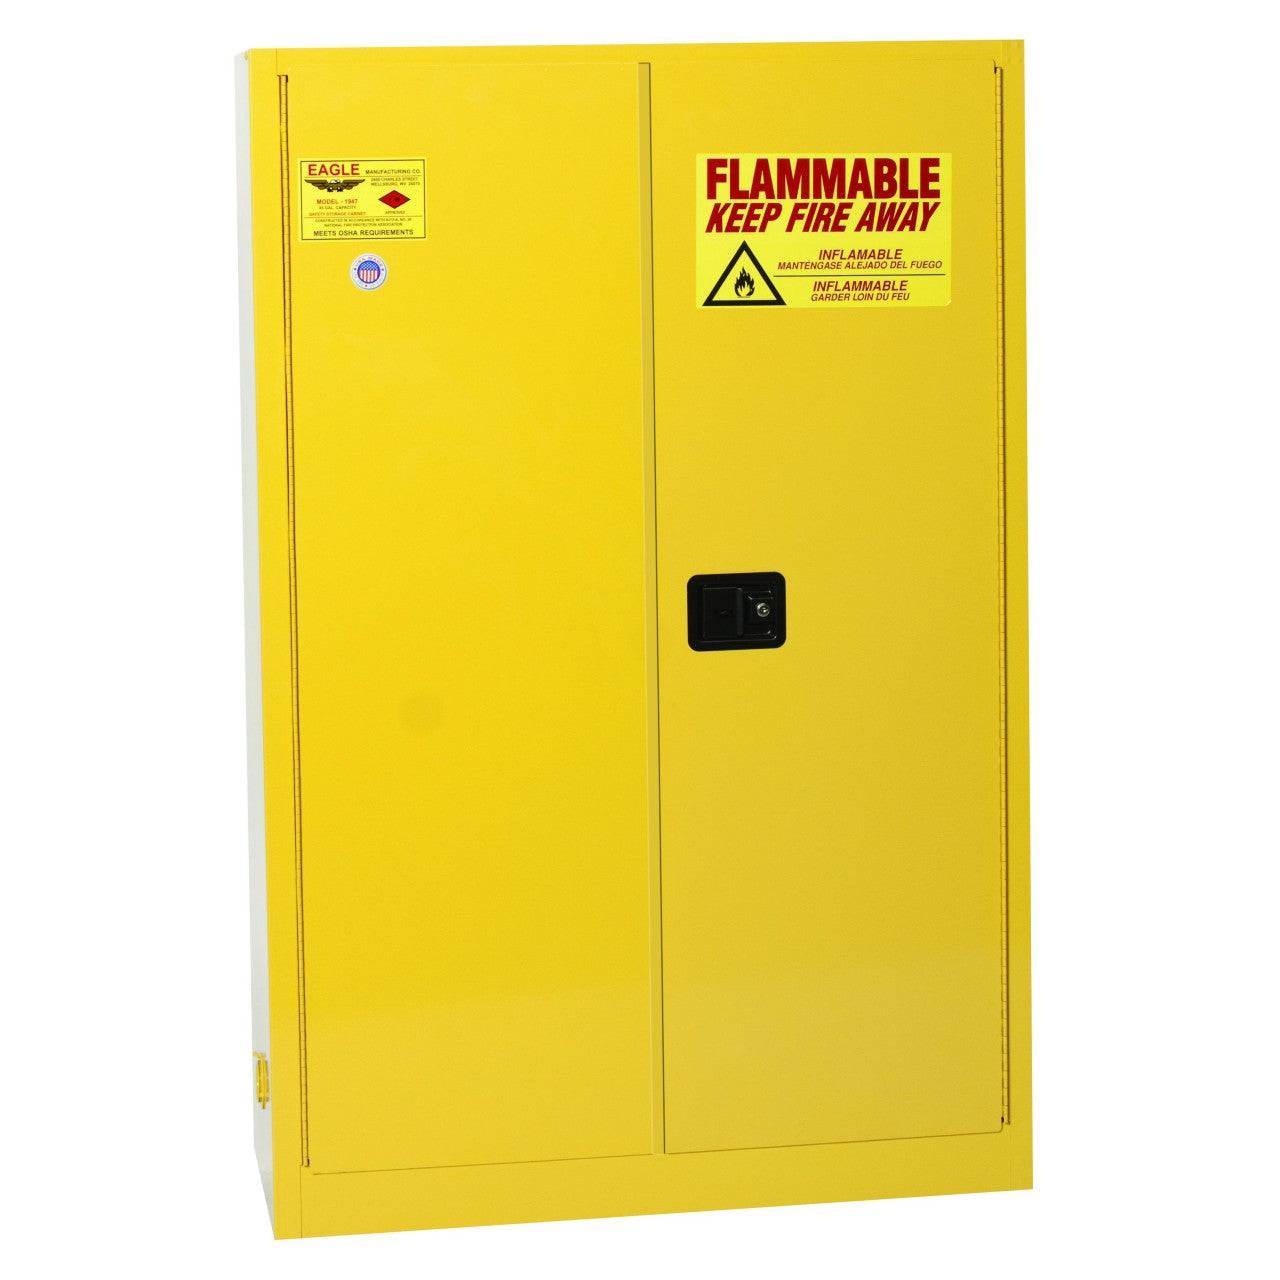 Flammable Liquid Safety Storage Cabinet, 45 Gal. Ylw, 2-Dr, Self-Close - Eagle Manufacturing